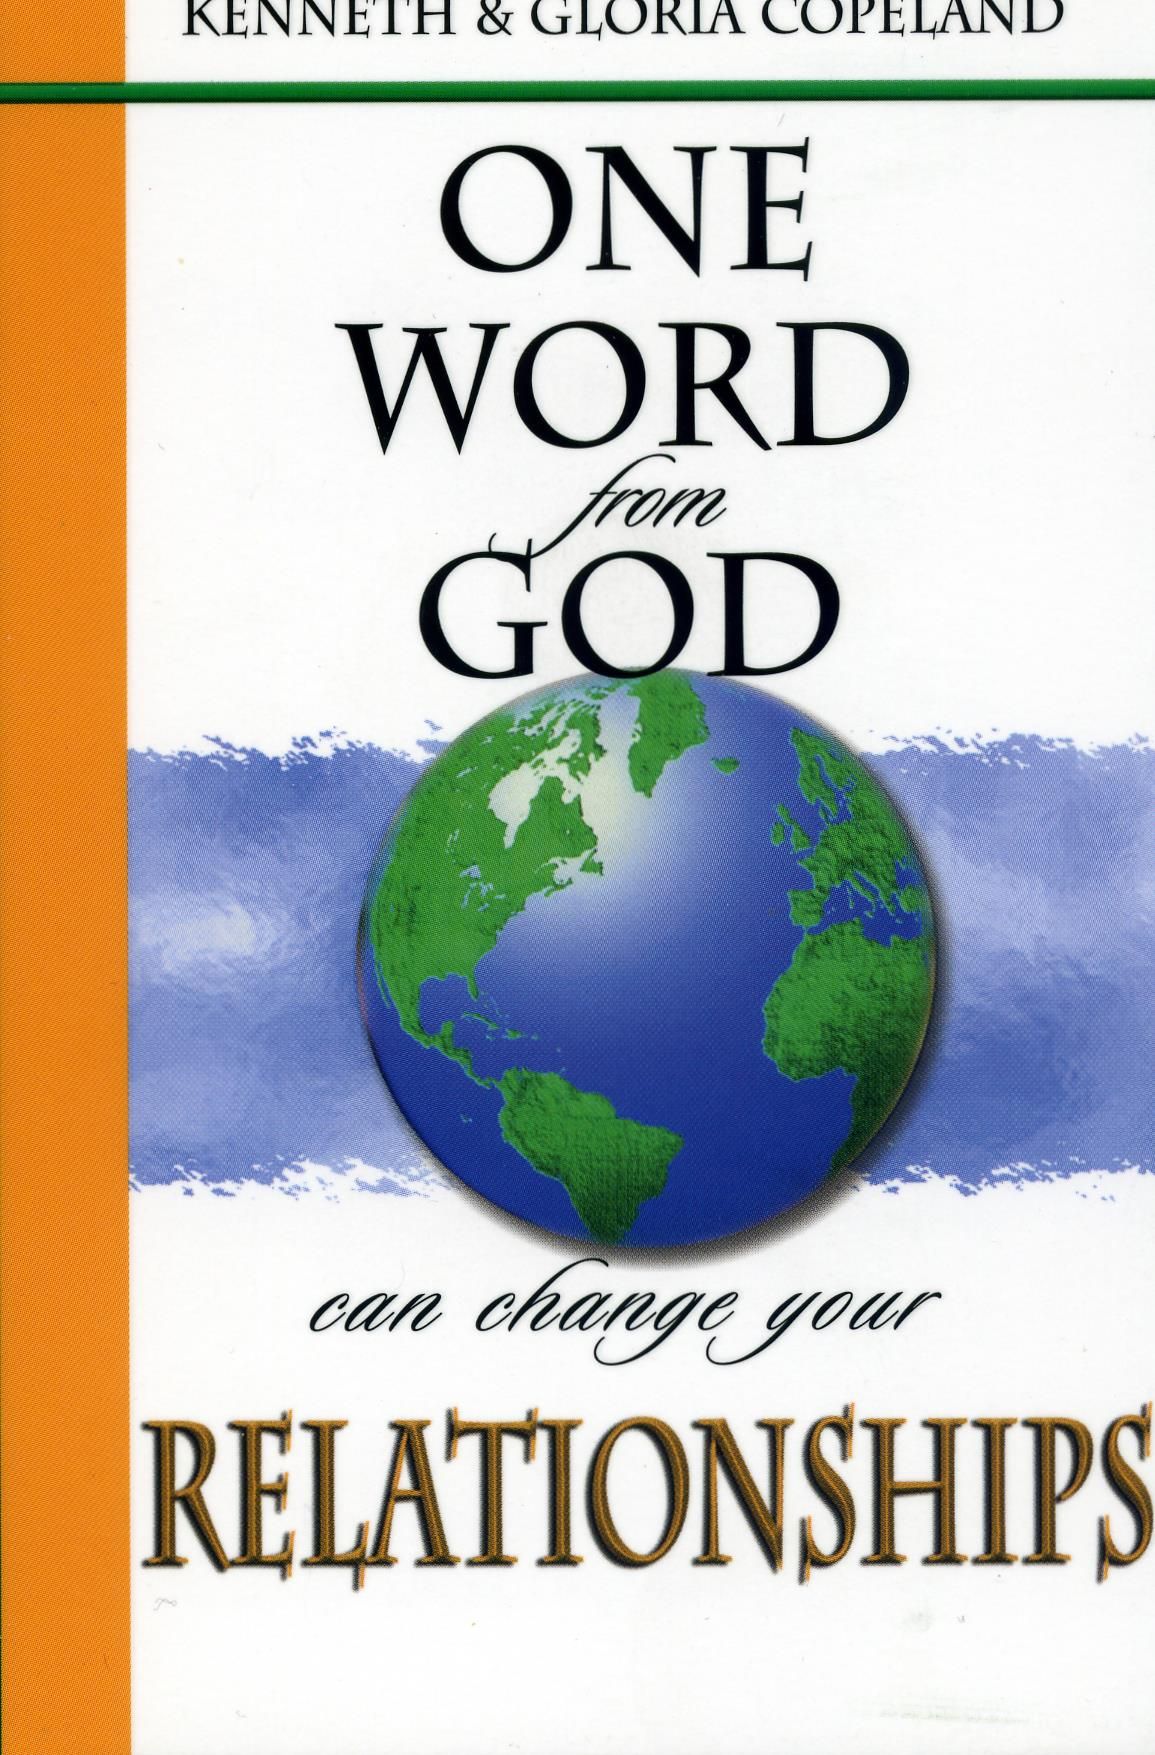 K. & G. Copeland: One Word from God can change your Relationship